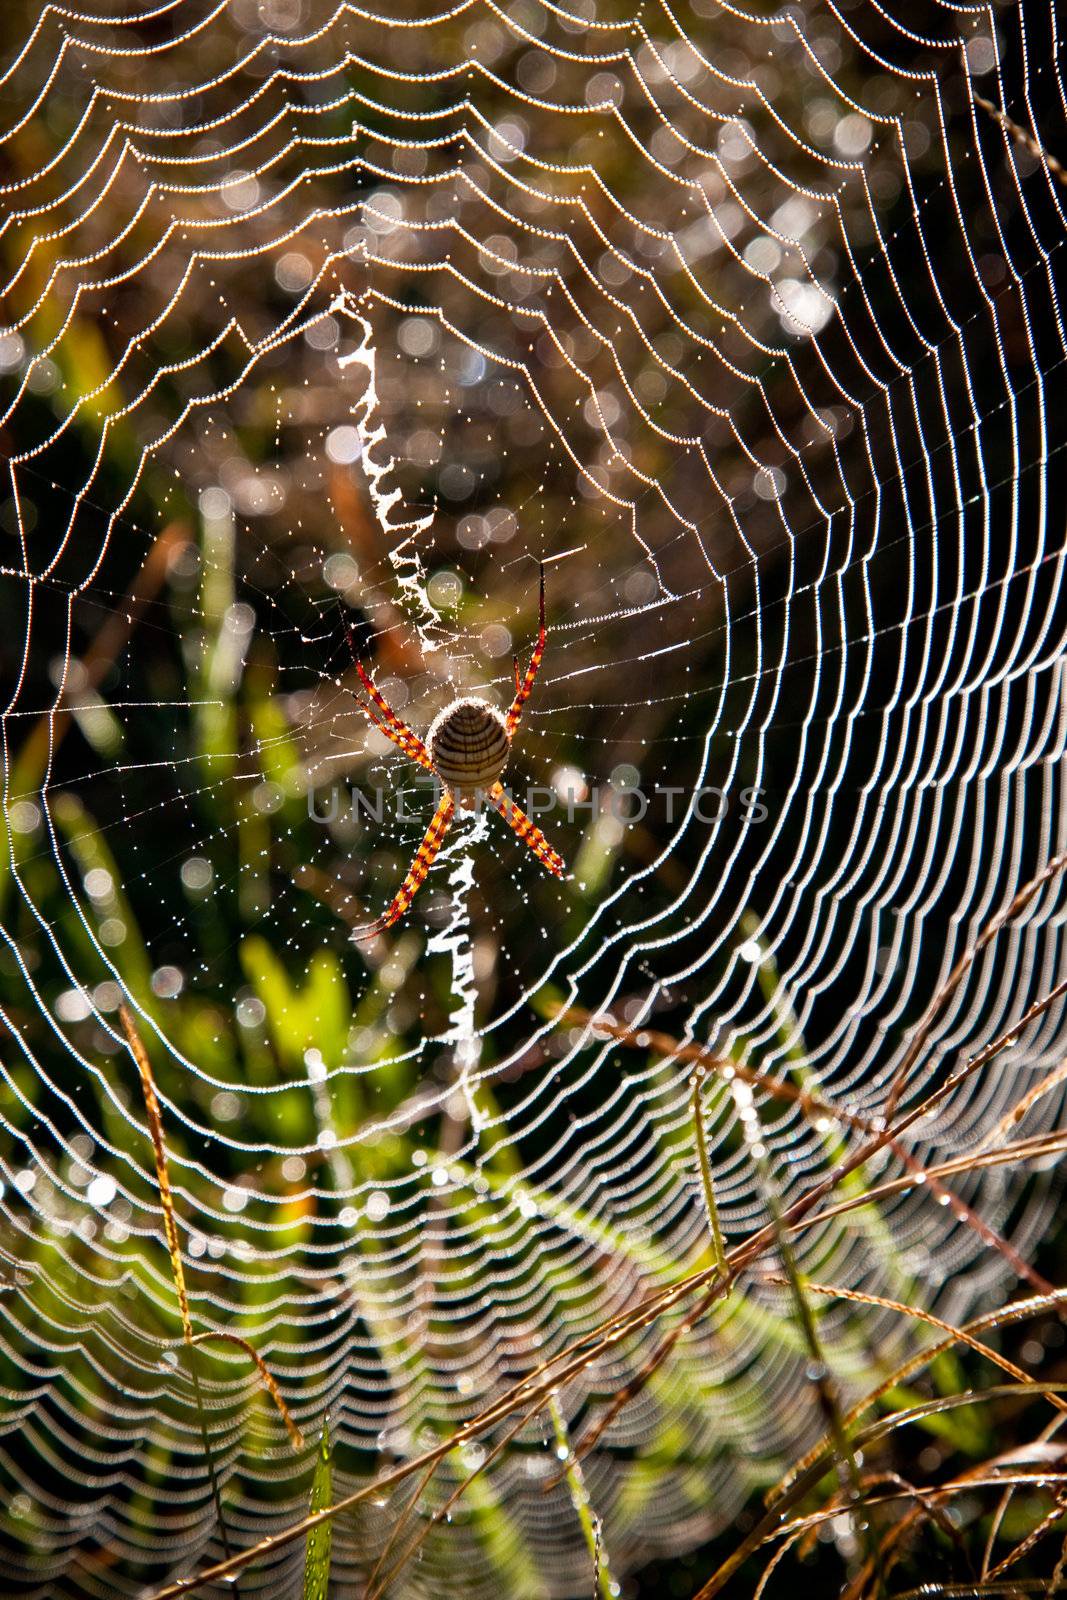 Sider building its web to catch food